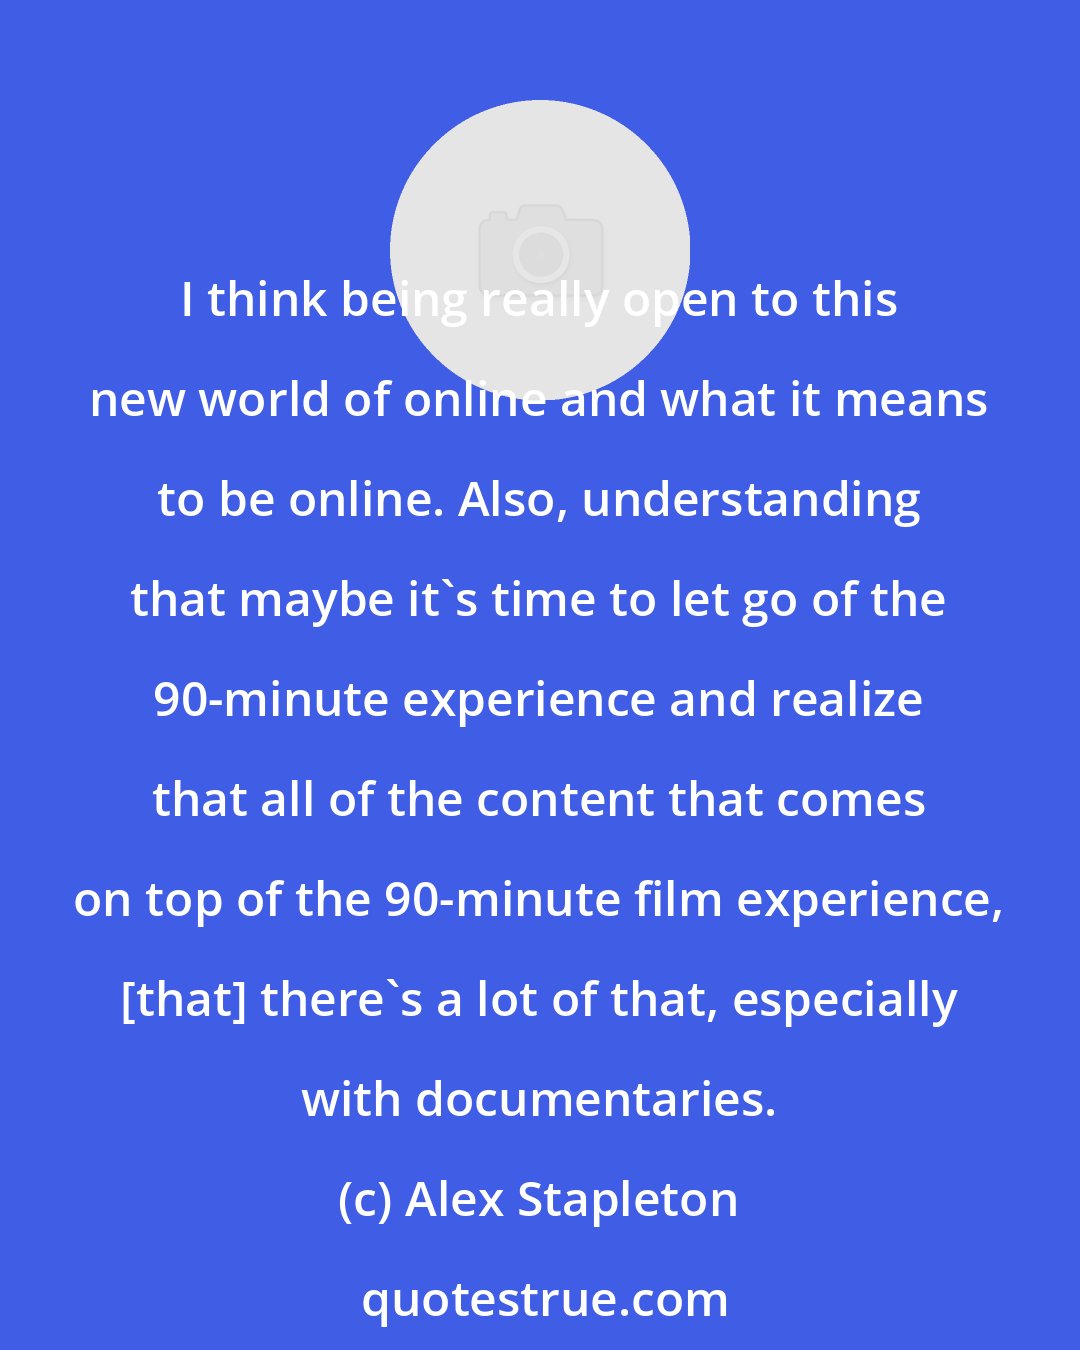 Alex Stapleton: I think being really open to this new world of online and what it means to be online. Also, understanding that maybe it's time to let go of the 90-minute experience and realize that all of the content that comes on top of the 90-minute film experience, [that] there's a lot of that, especially with documentaries.